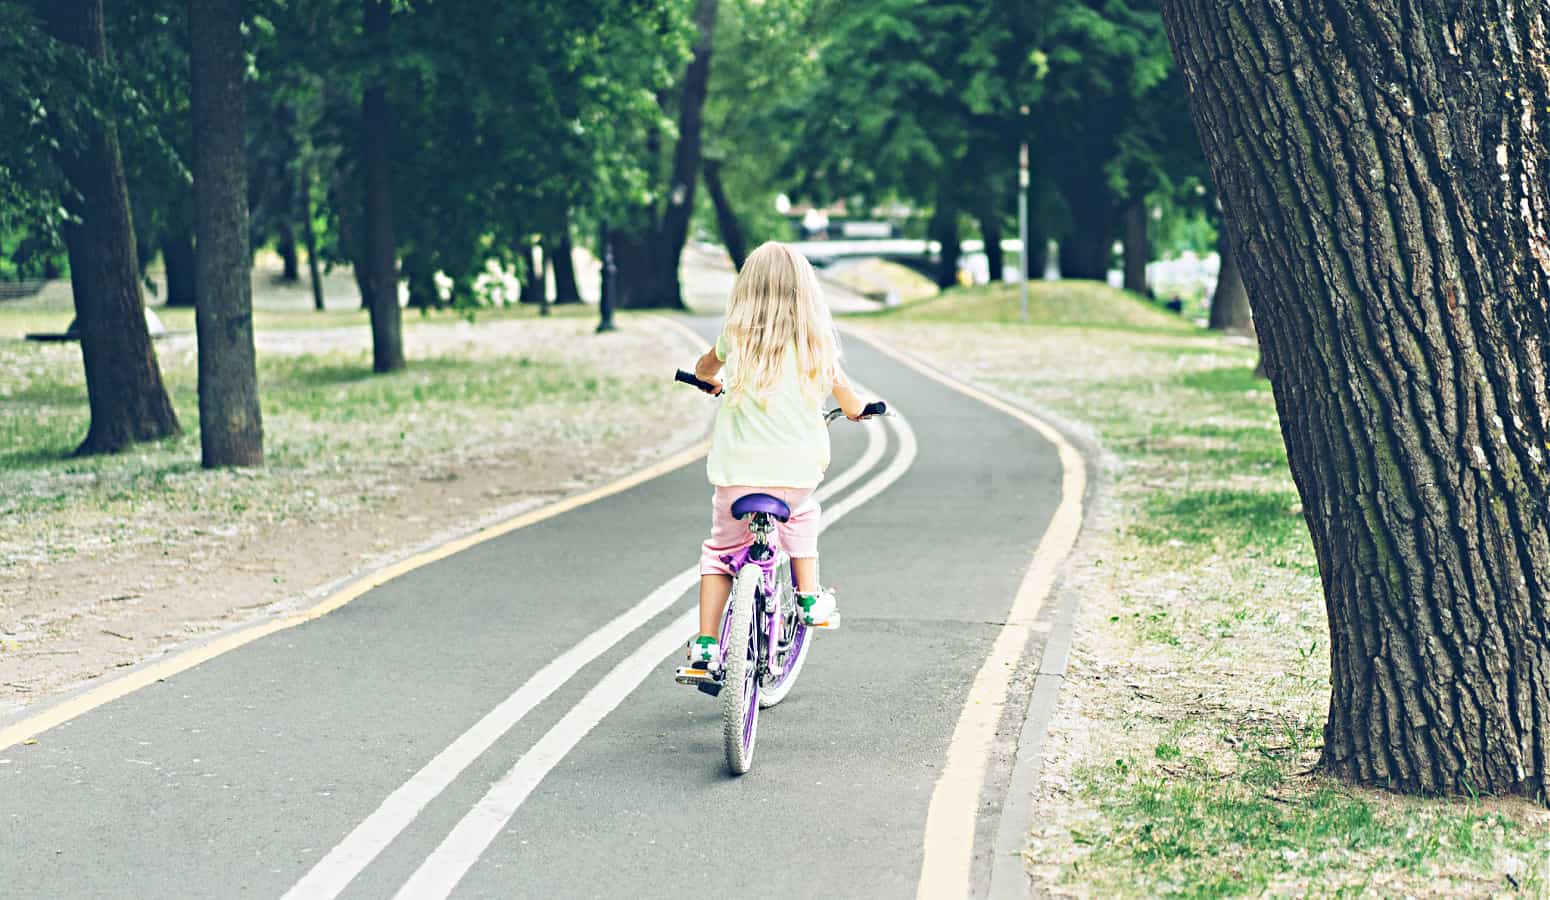 little girl riding bike by herself on the road free range parenting safely